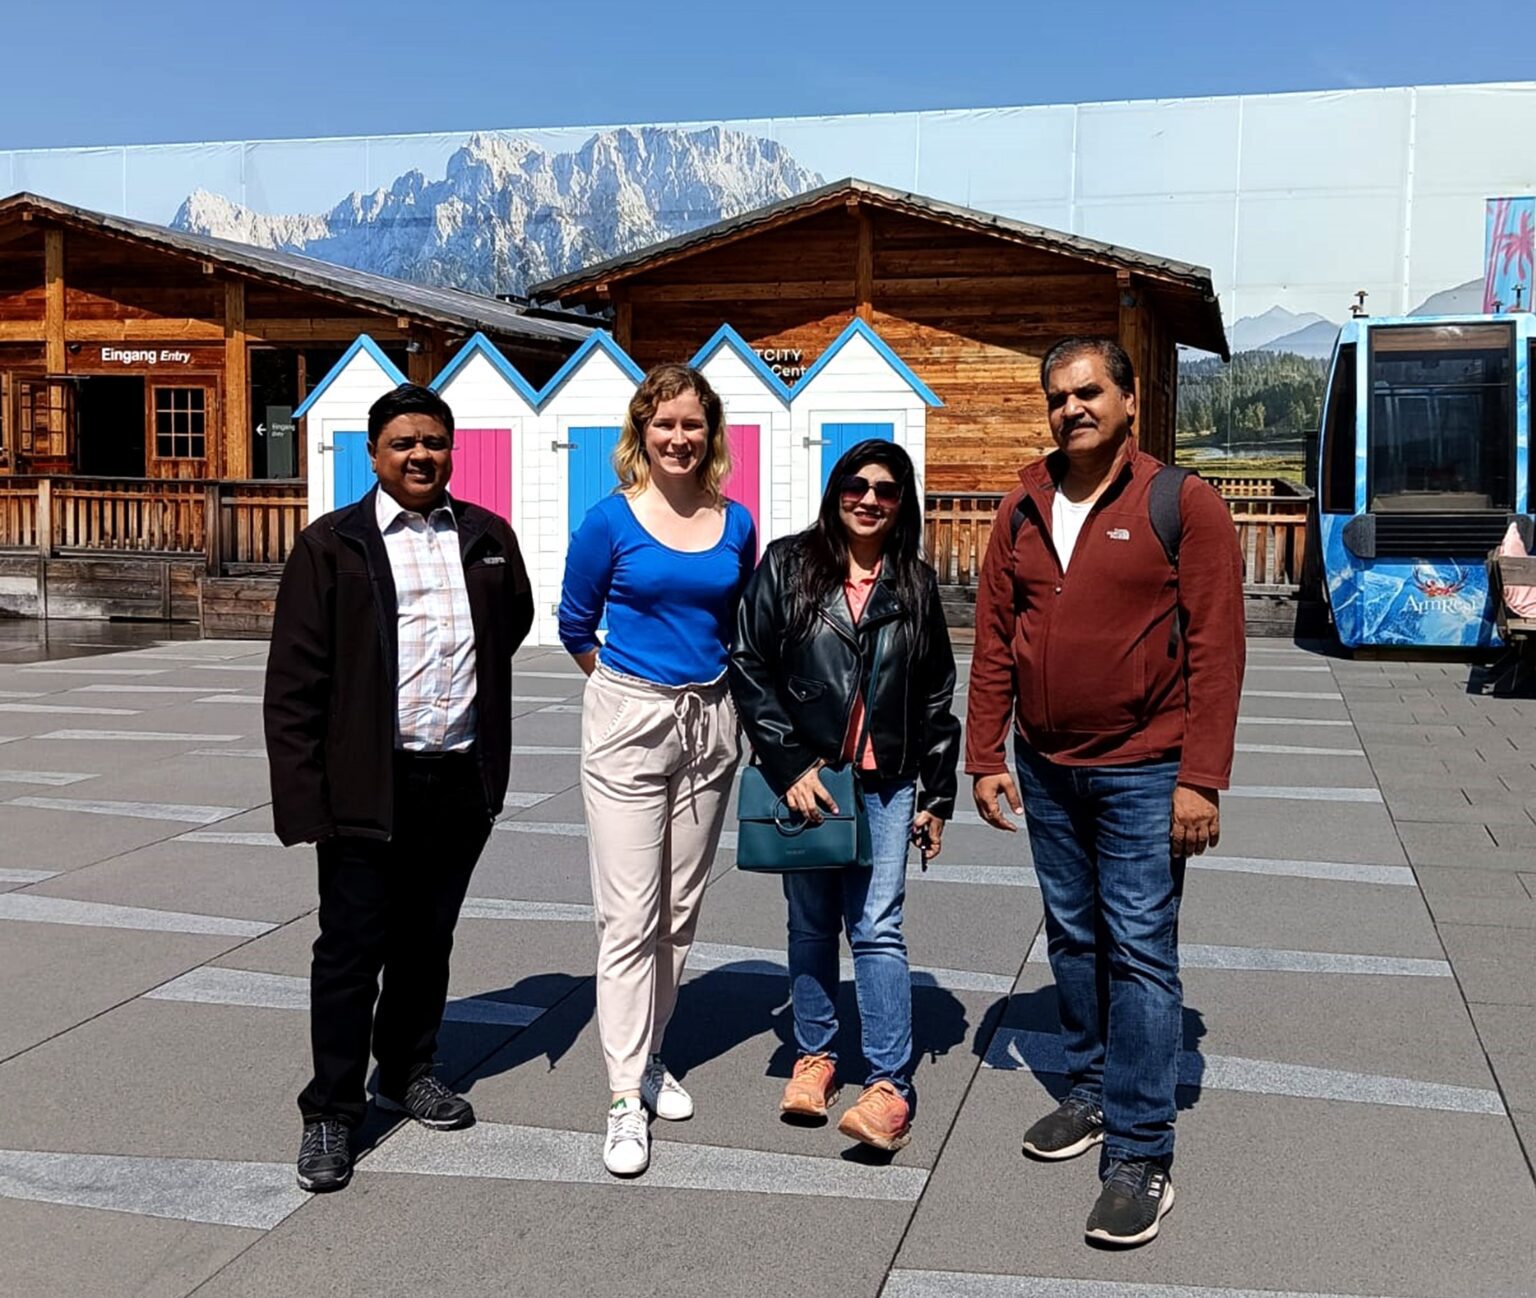 Outletcity Metzingen hosted Familiarization Trip for Indian Luxury Travel Agents